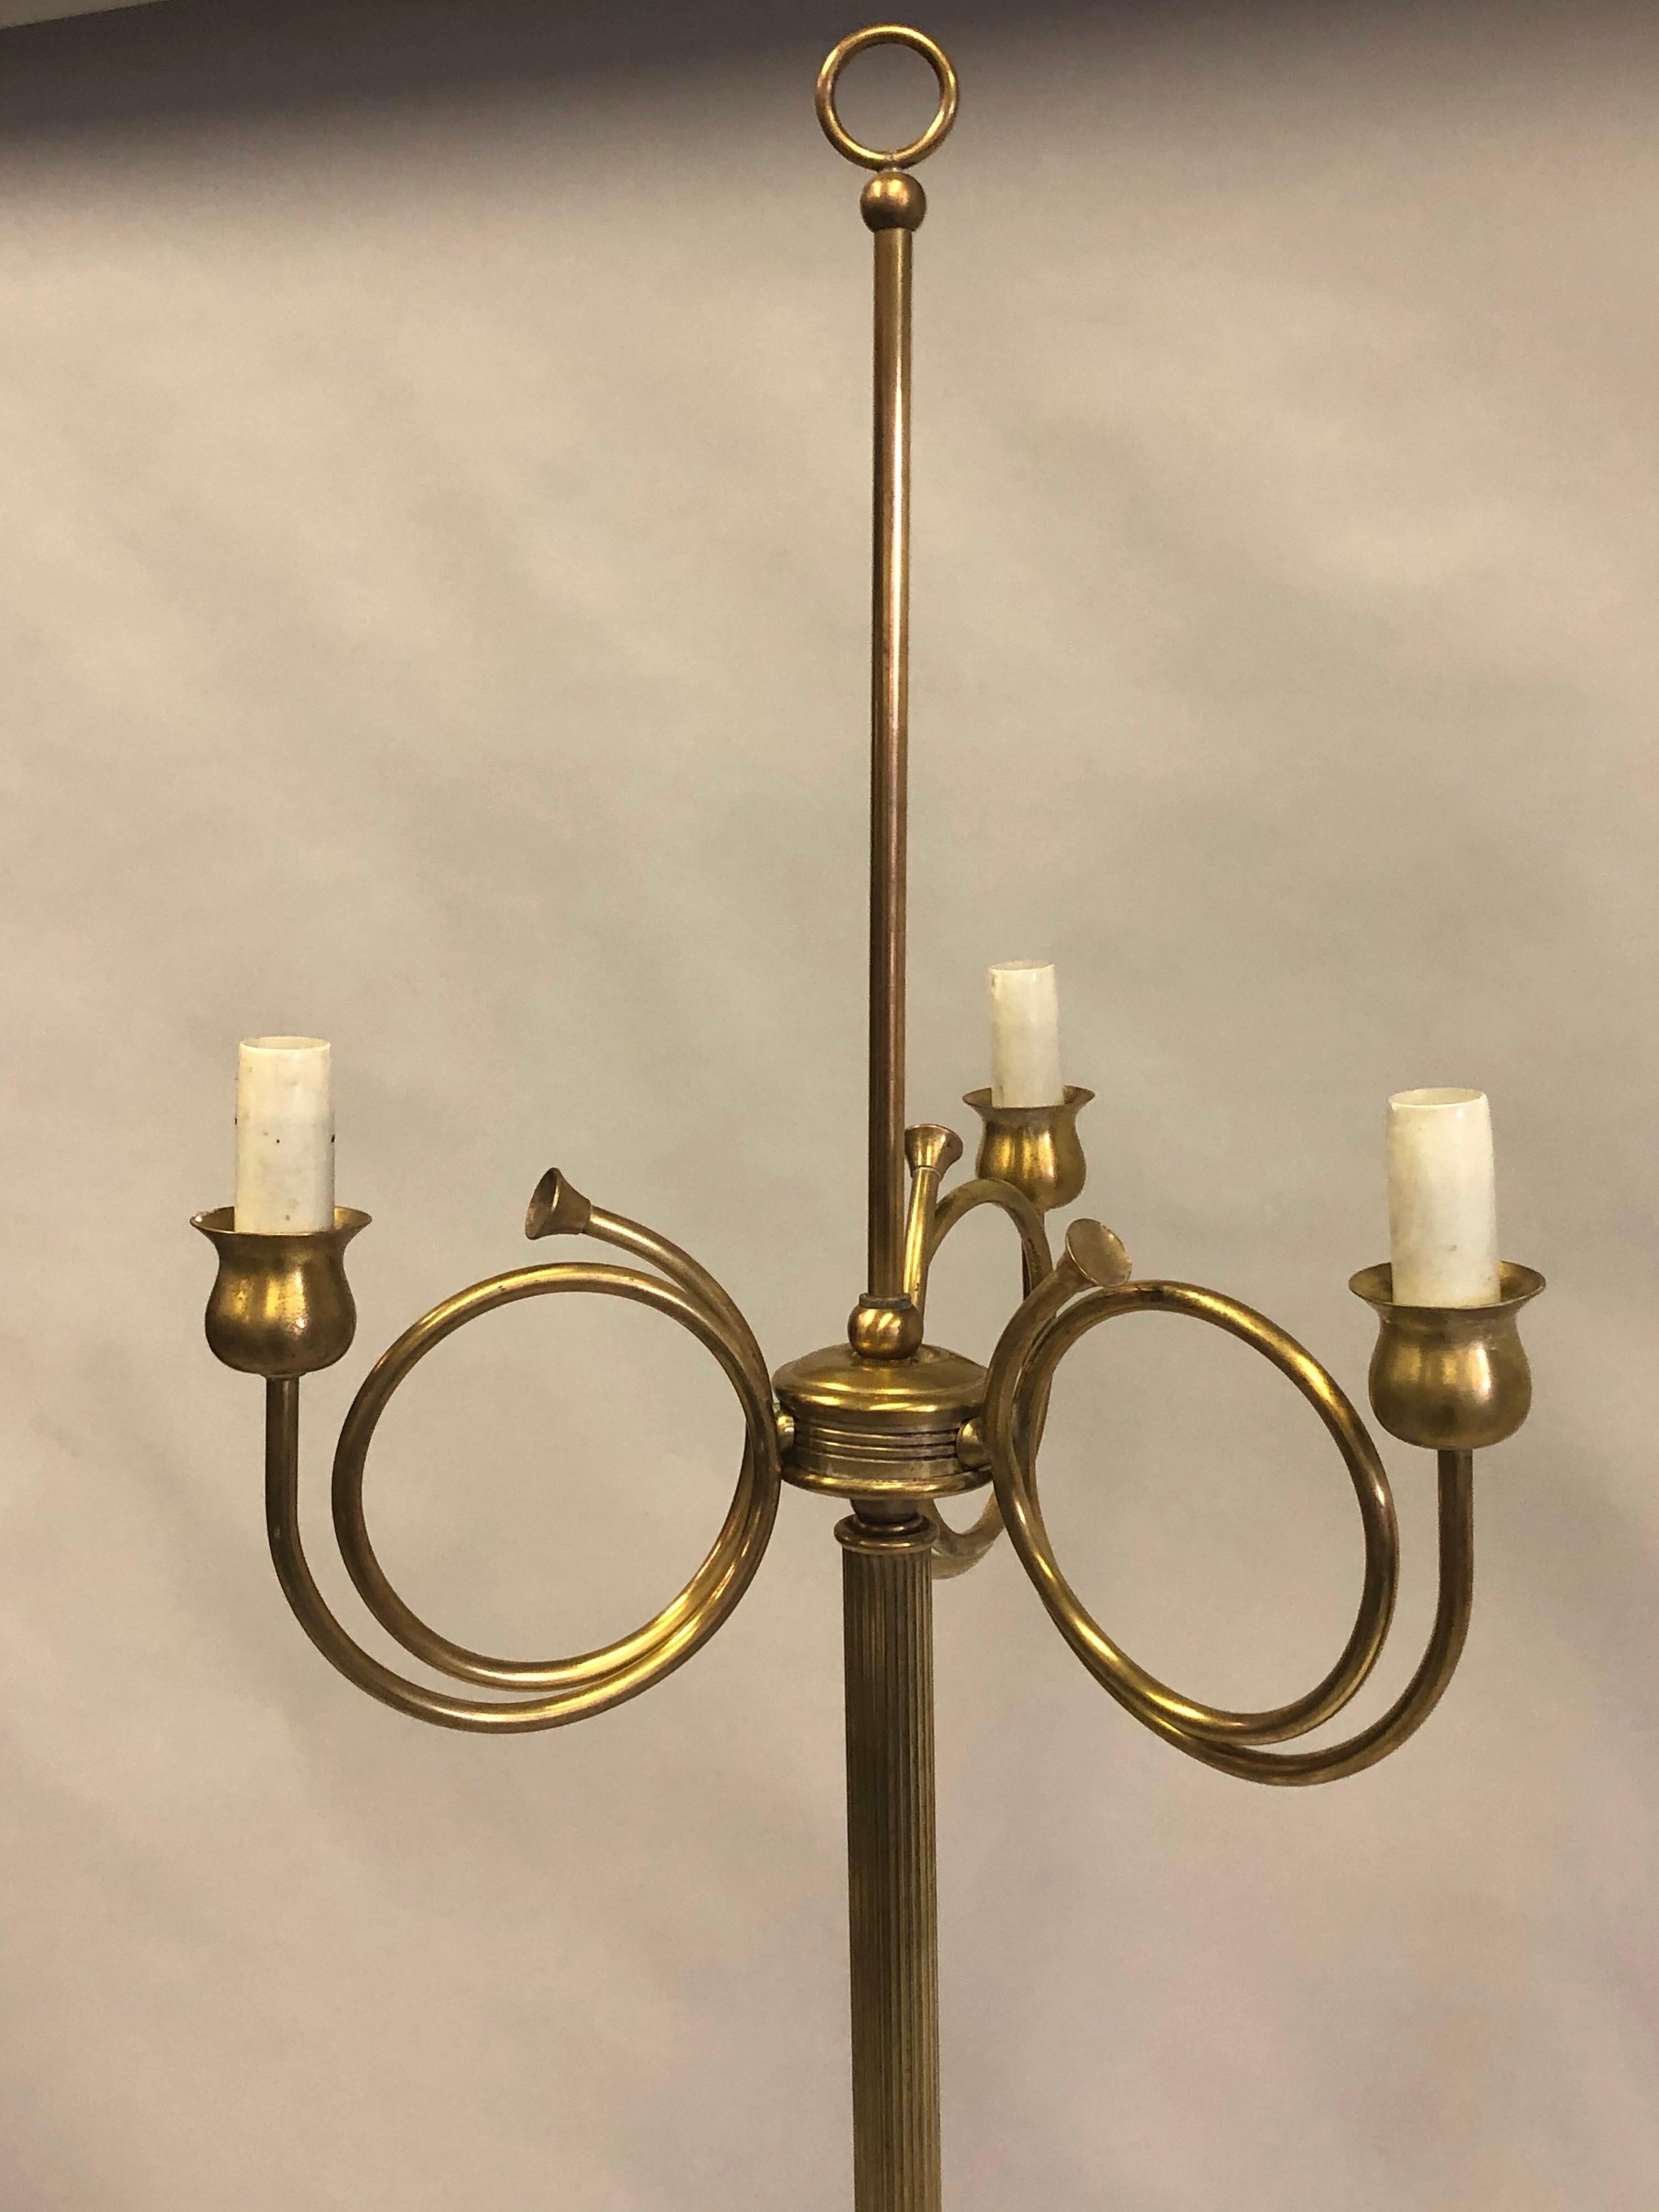 20th Century Pair of Mid-Century Modern Neoclassical Brass Floor Lamps by Maison Jansen For Sale